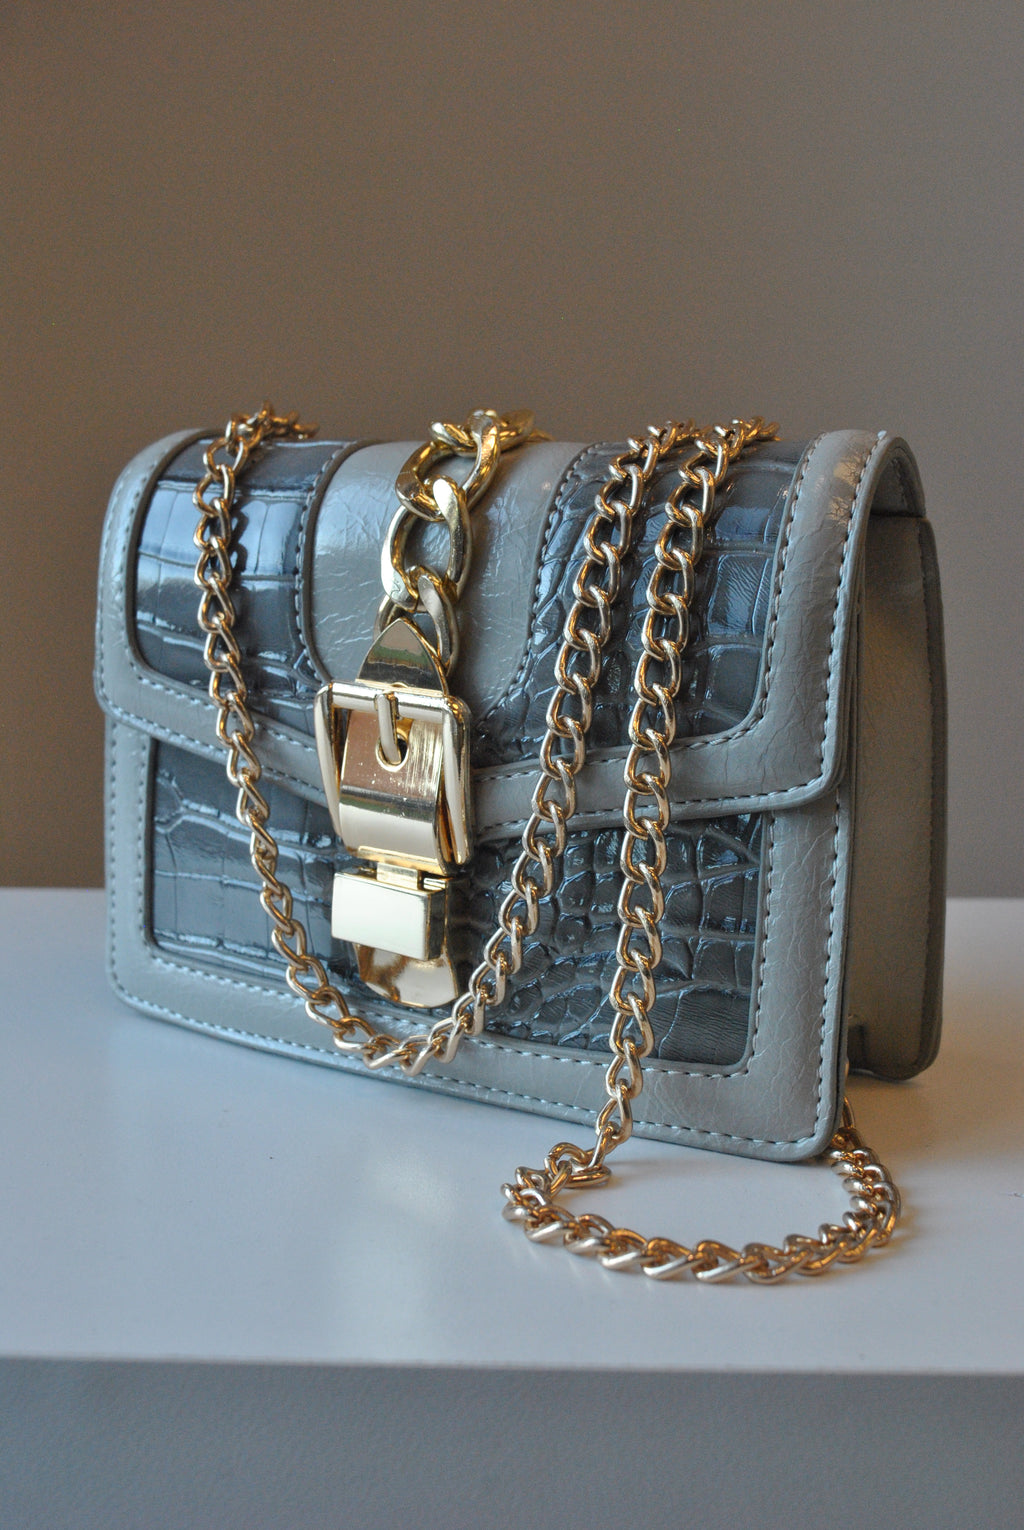 SMALL LIGHT GREY CROSSBODY BAG WITH GOLD CHAIN